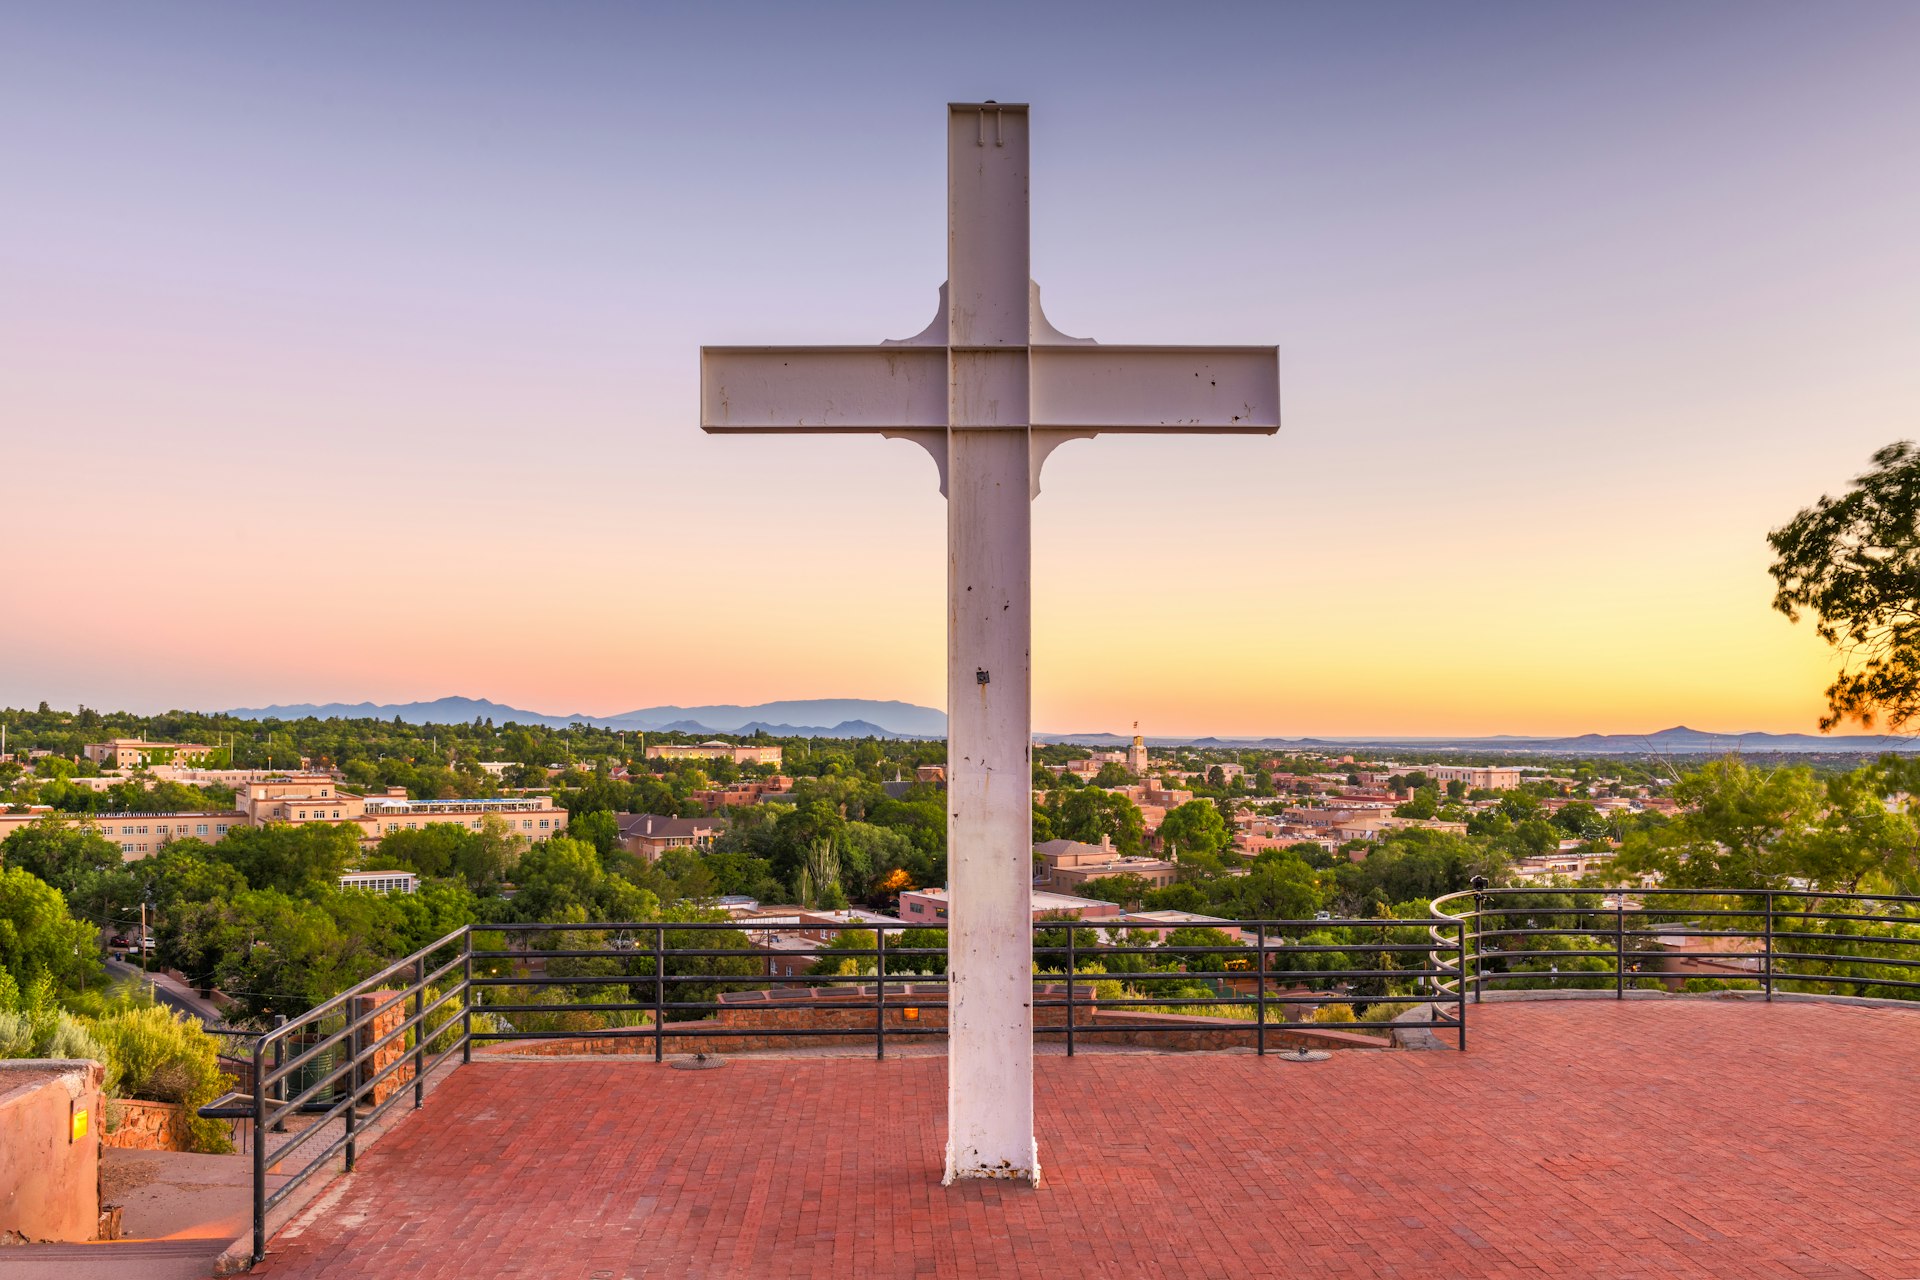 A view of the Cross of the Martyrs in Santa Fe: a large cross standing on a hill, with a view of the city skyline beyond it.